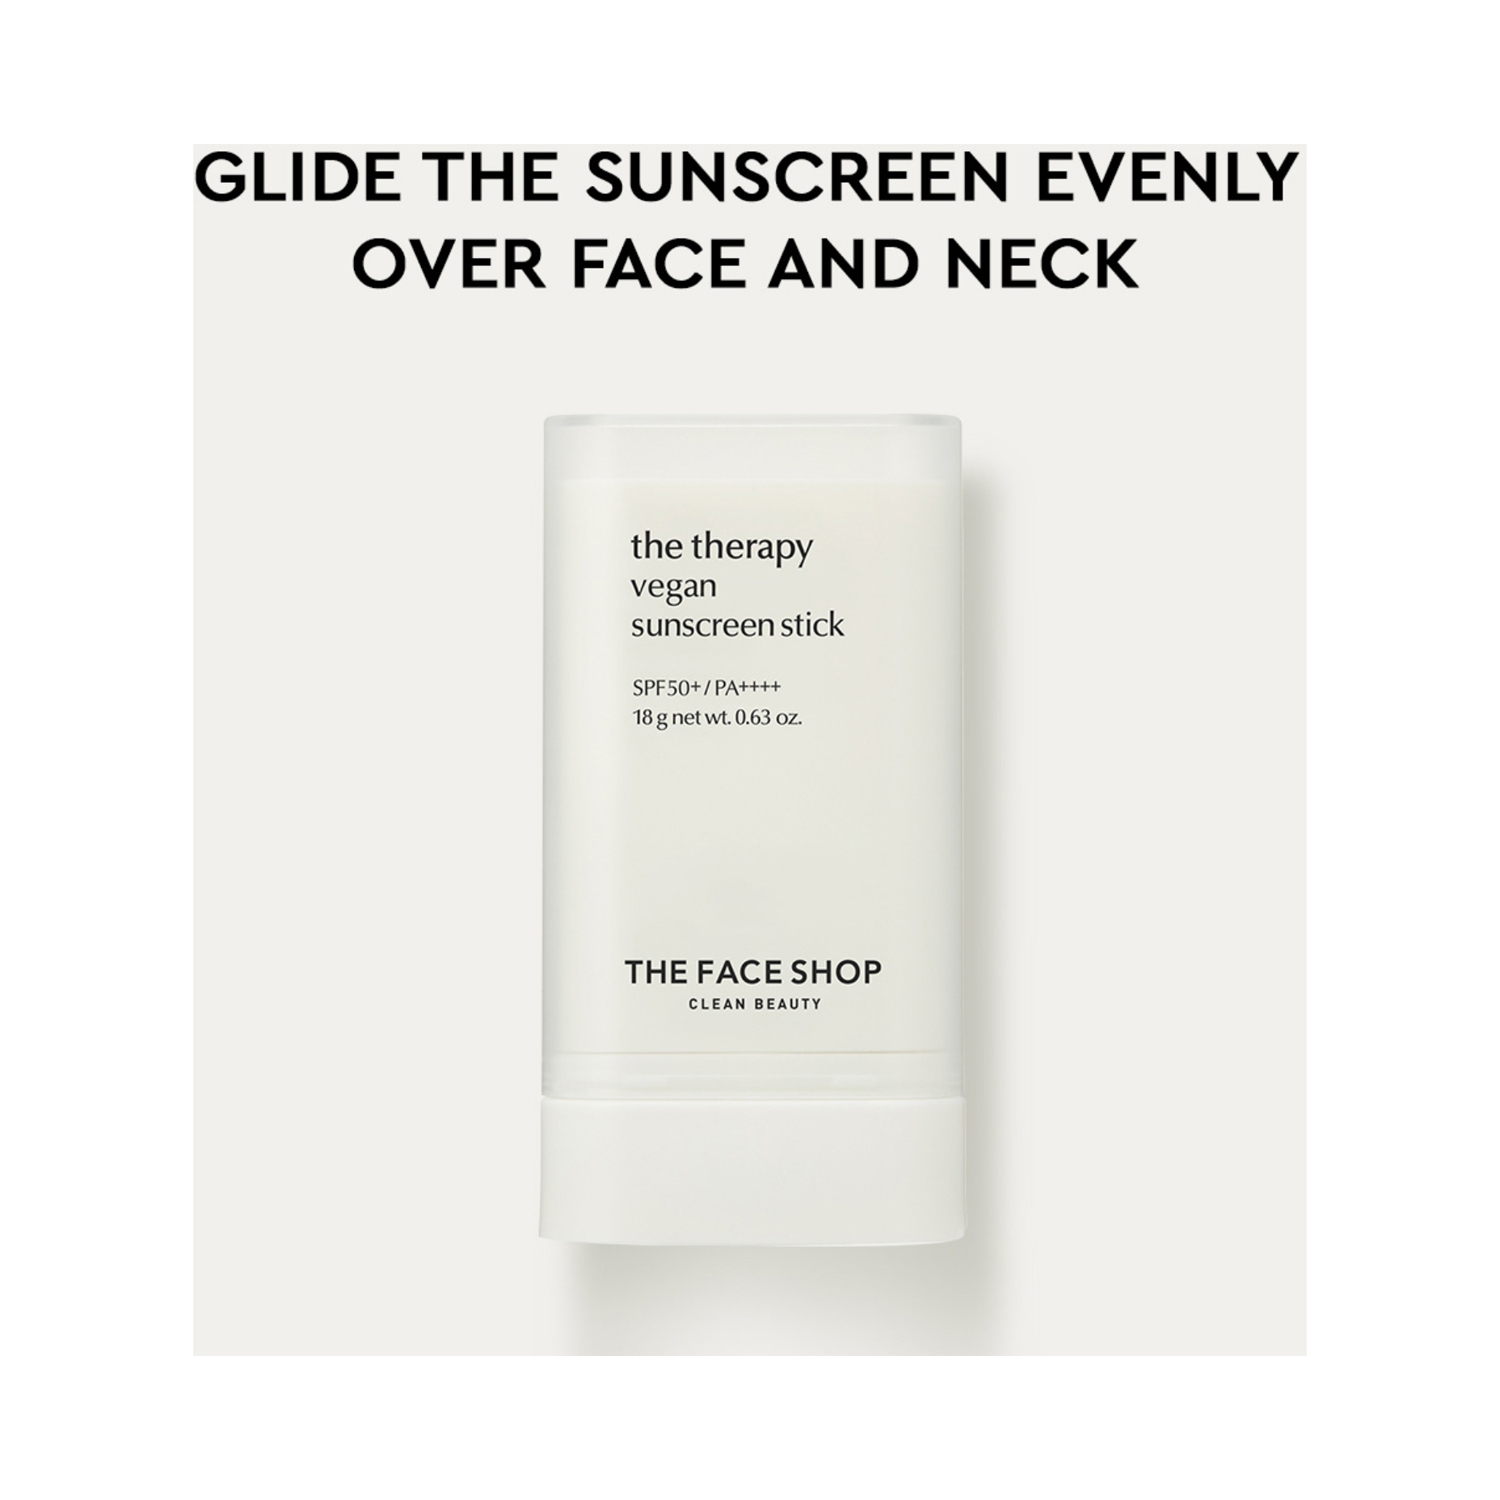 The Face Shop The Therapy Vegan Sunscreen Stick SPF 50 (18g)